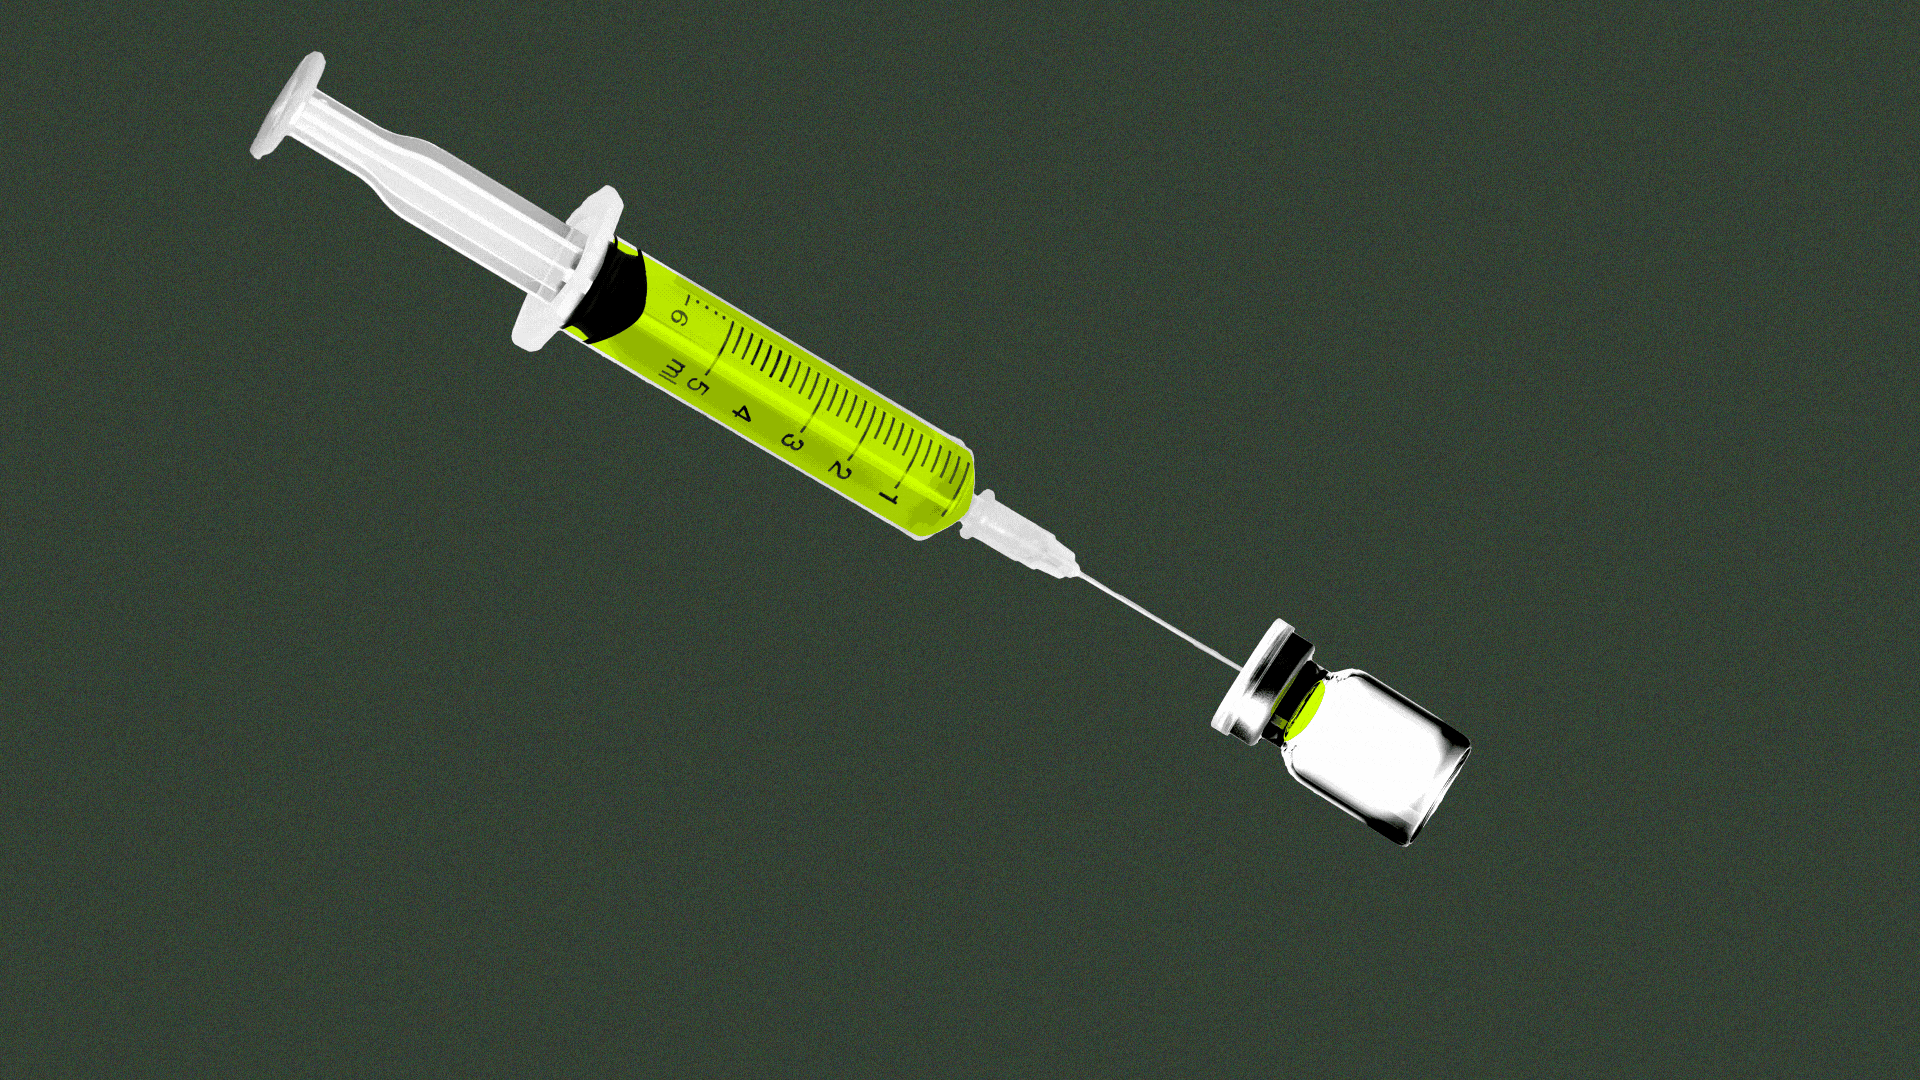 Illustration of a syringe drawing vaccine out of a vial.